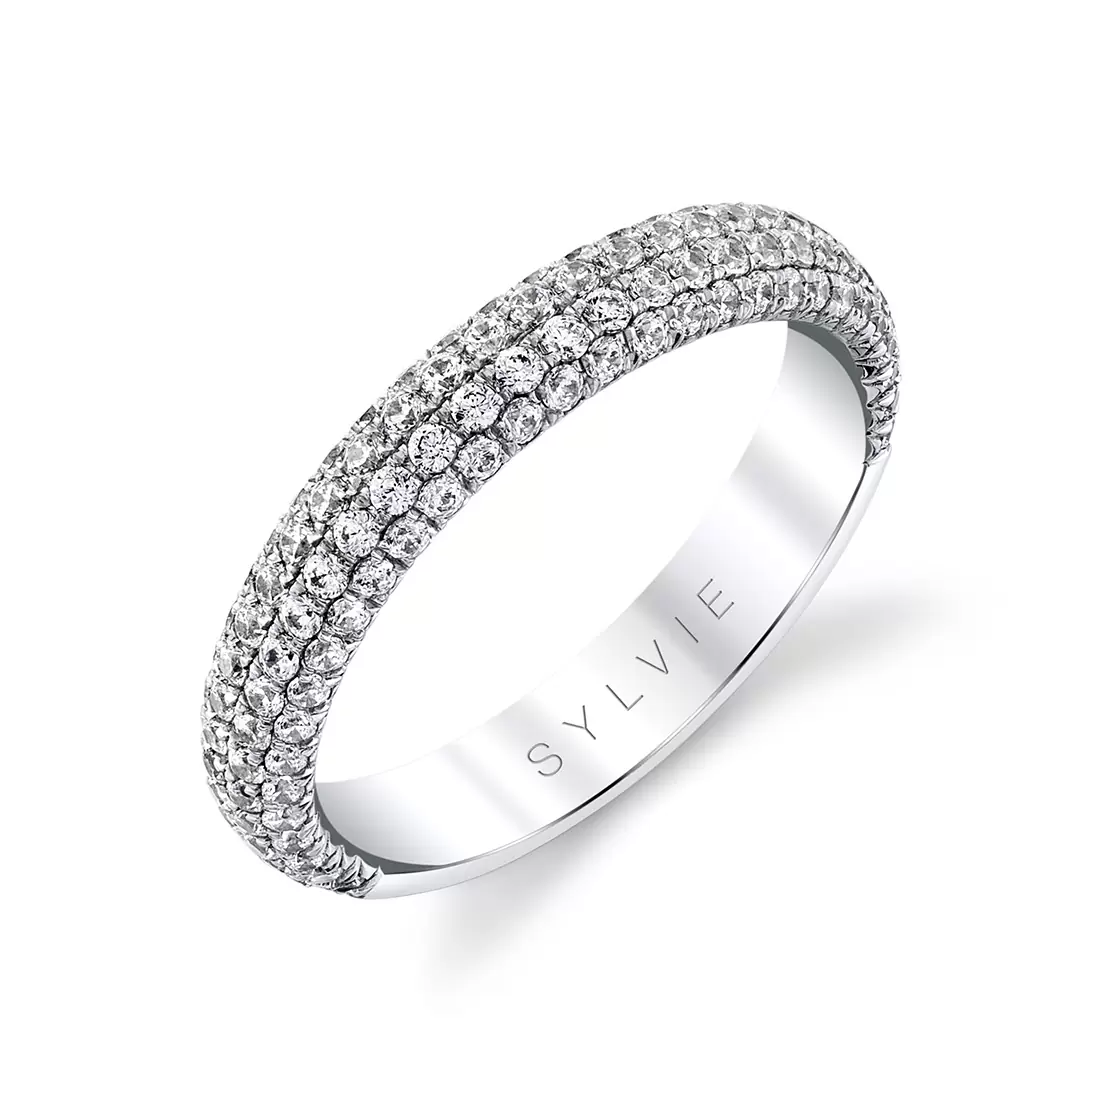 White gold thick pave wedding ring.